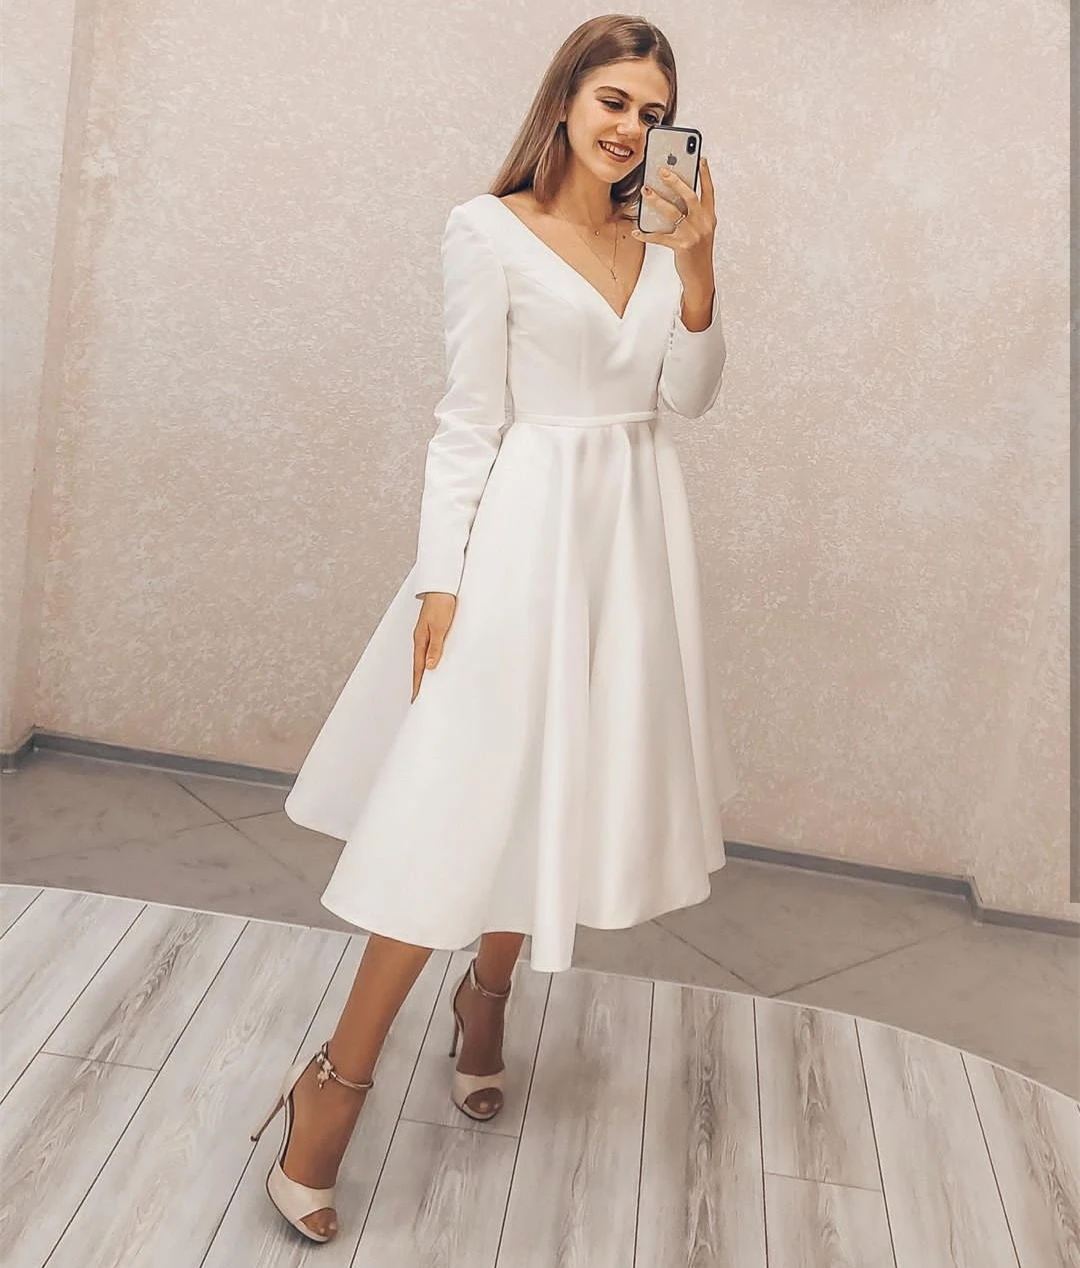 second hand wedding dresses LUXIYIAO LO85 Short Wedding Dress 2022 A-Line Long Sleeve V-Neck Simple Boho Vintage For Women Robe De Mariee Bridal Gowns winter wedding dresses